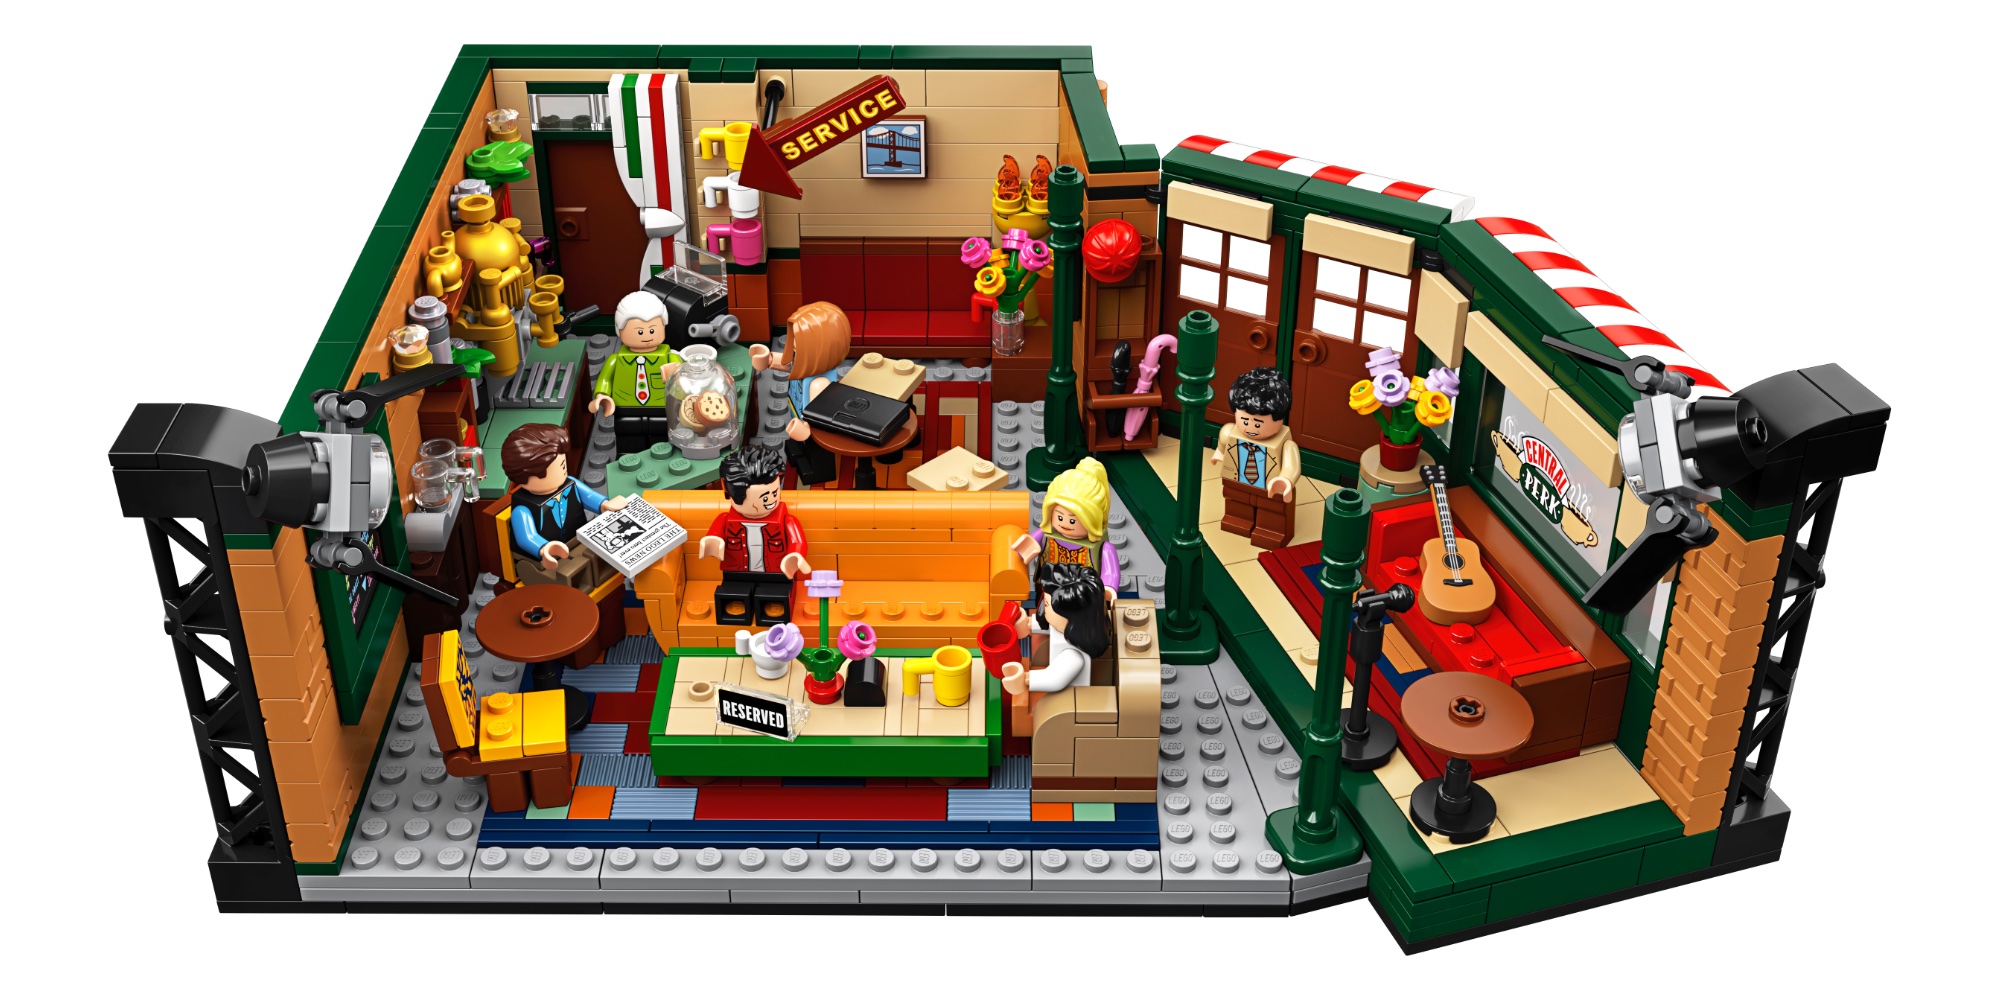 LEGO Friends Central Perk packs 1,070 bricks and 7 new figs - 9to5Toys